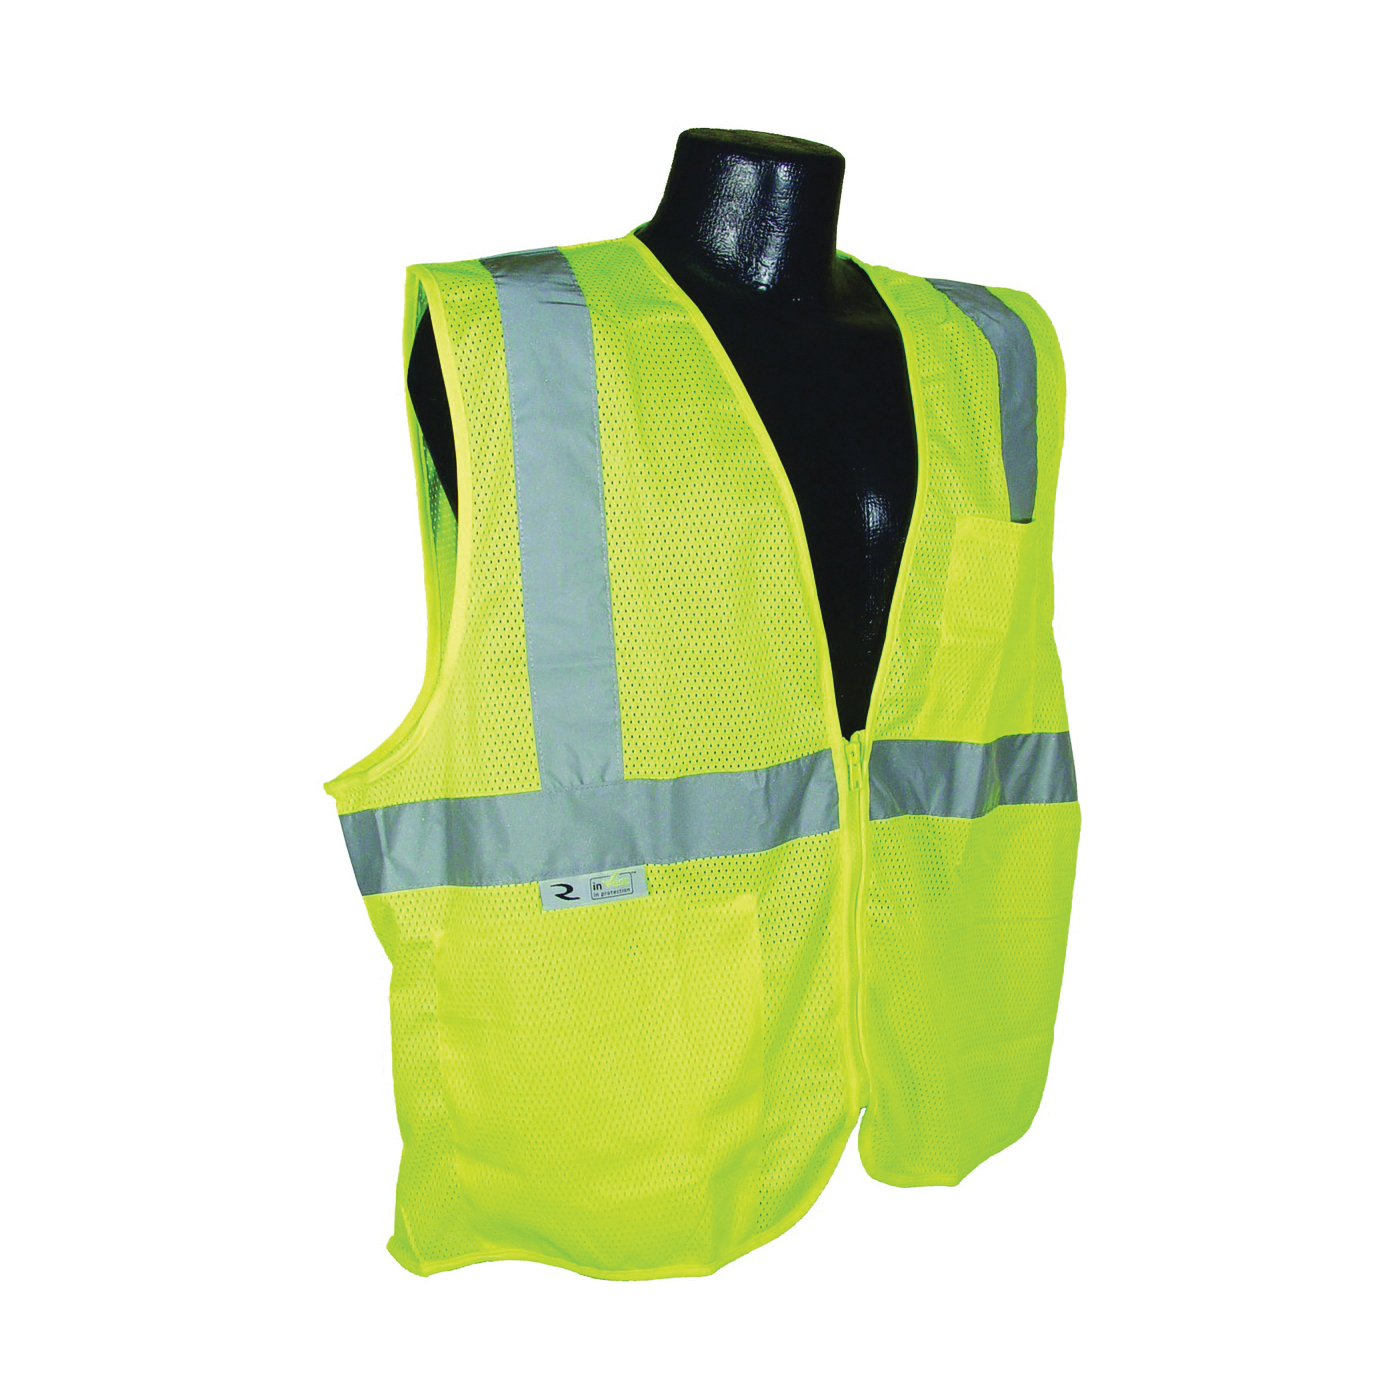 SV2ZGM-L Economical Safety Vest, L, Unisex, Fits to Chest Size: 26 in, Polyester, Green/Silver, Zipper Closure